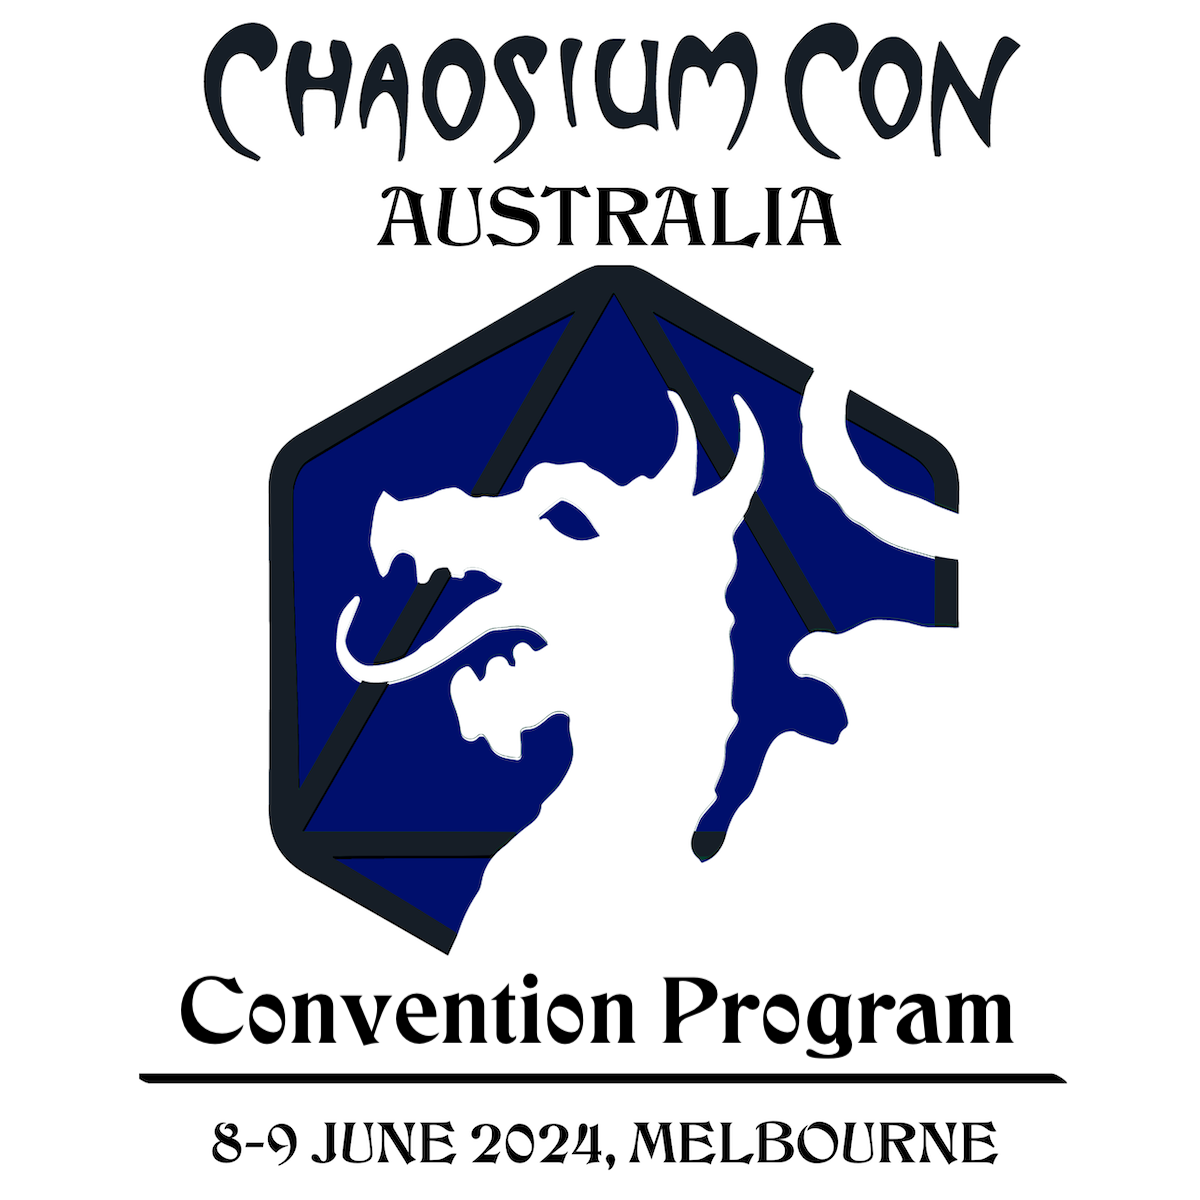 [Chaosium] Chaosium Con Australia Update: Here is the complete convention program!